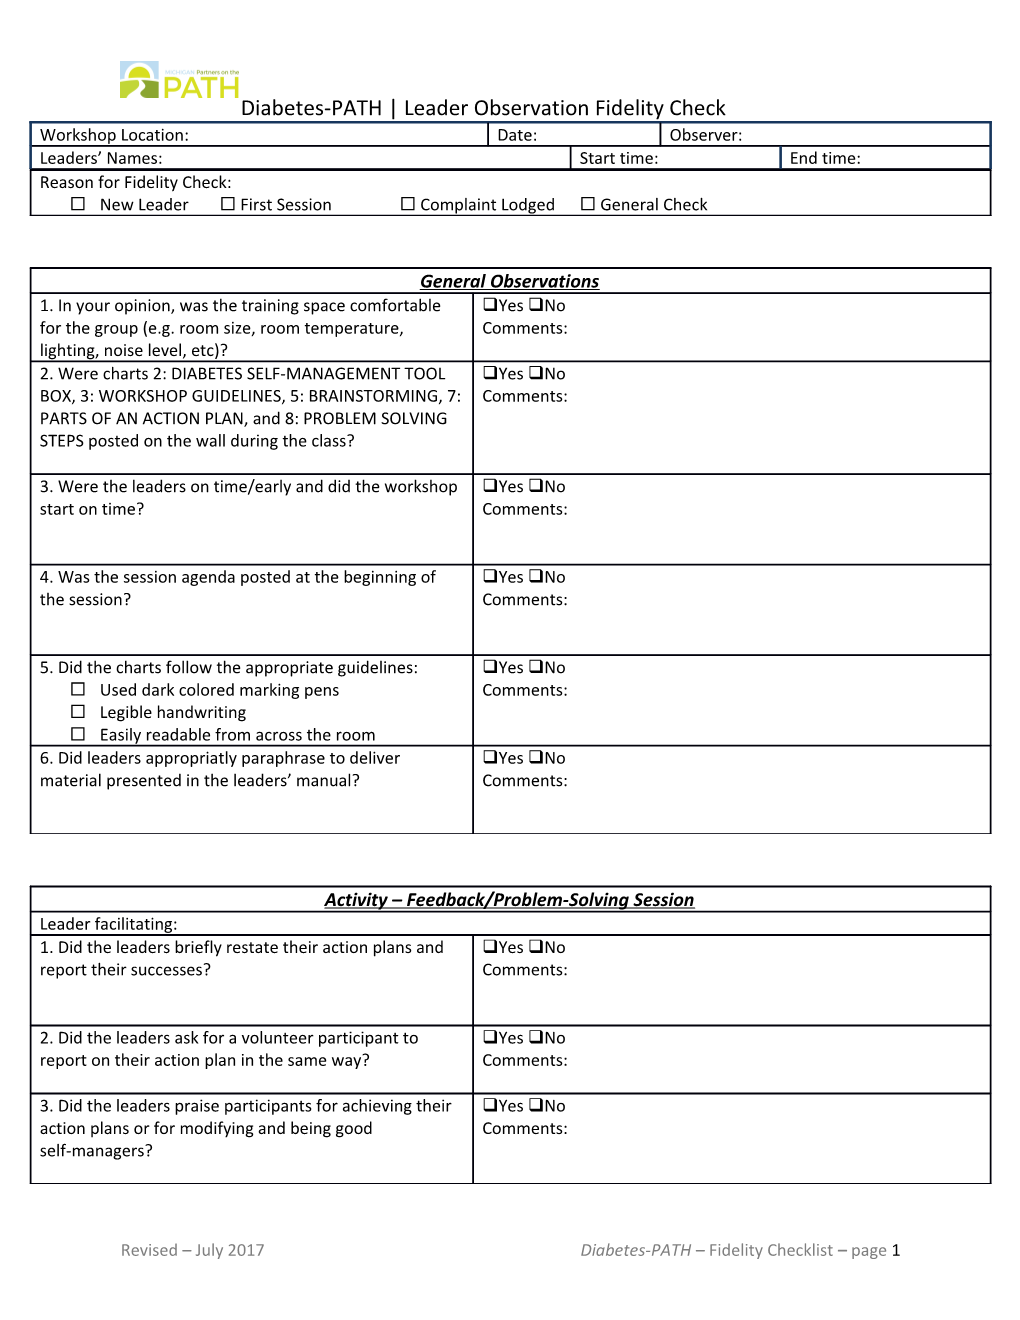 Revised July 2017Diabetes-PATH Fidelity Checklist Page1